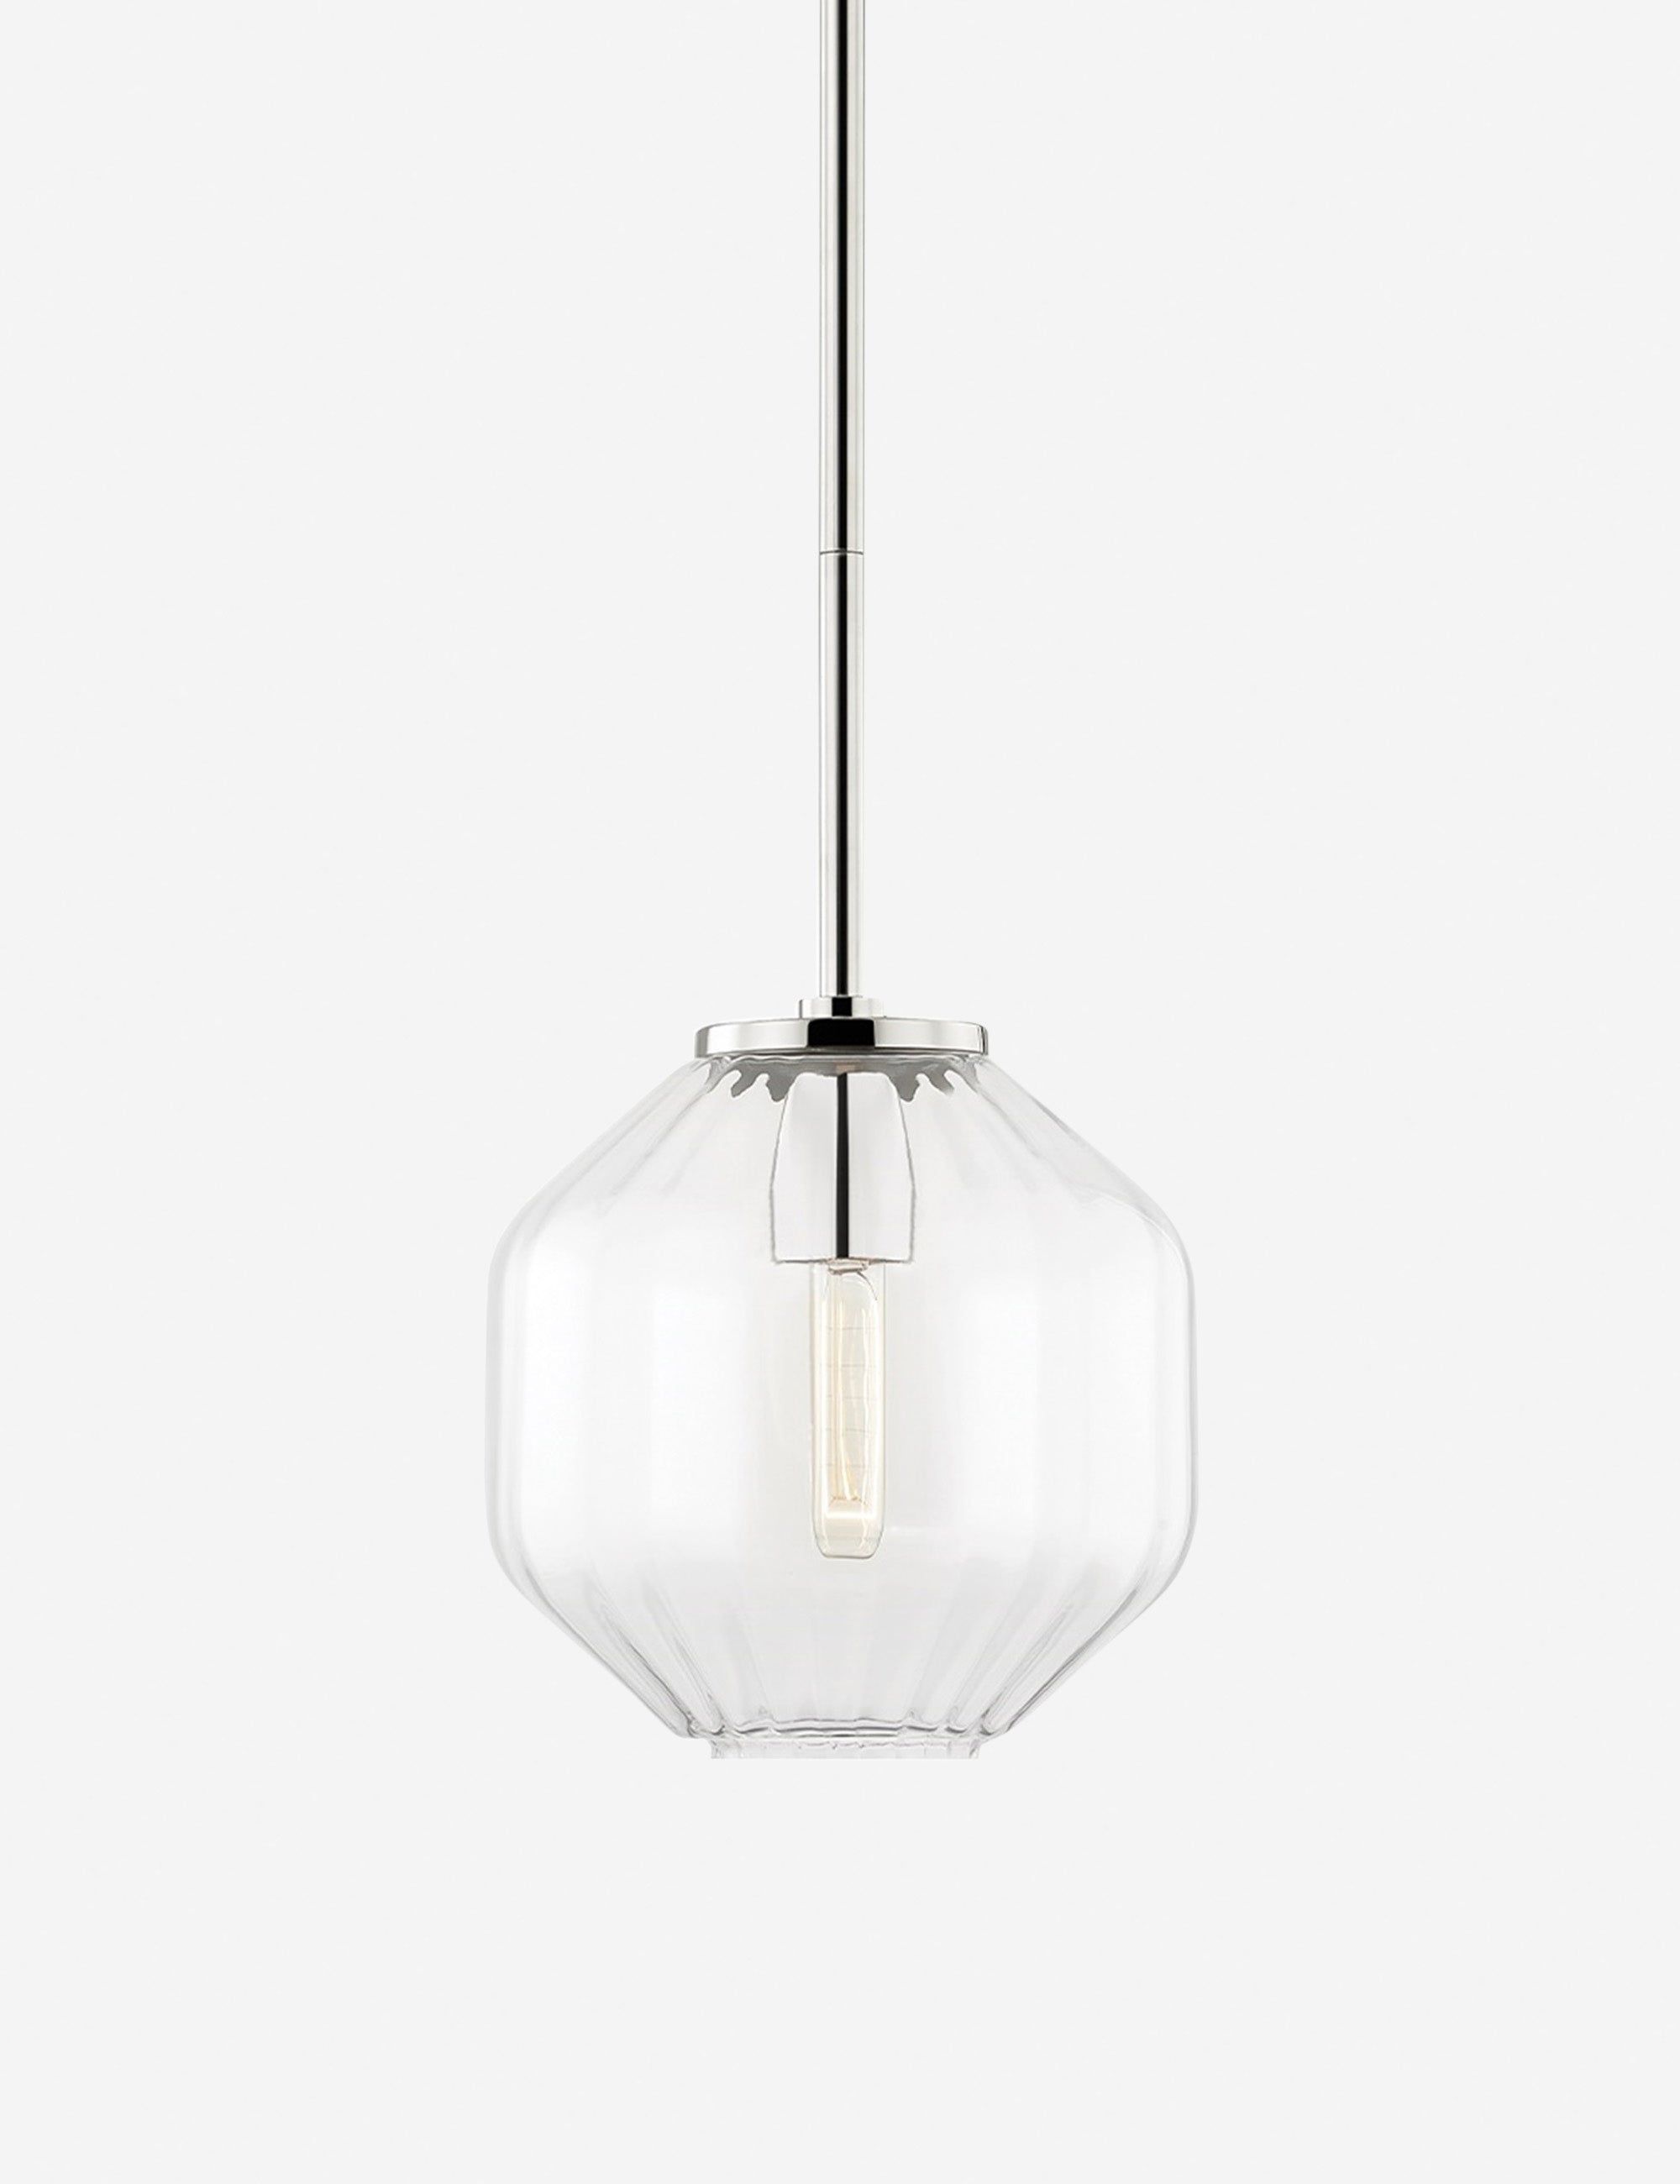 Elegant Globe Pendant Light in Polished Nickel with Clear Glass